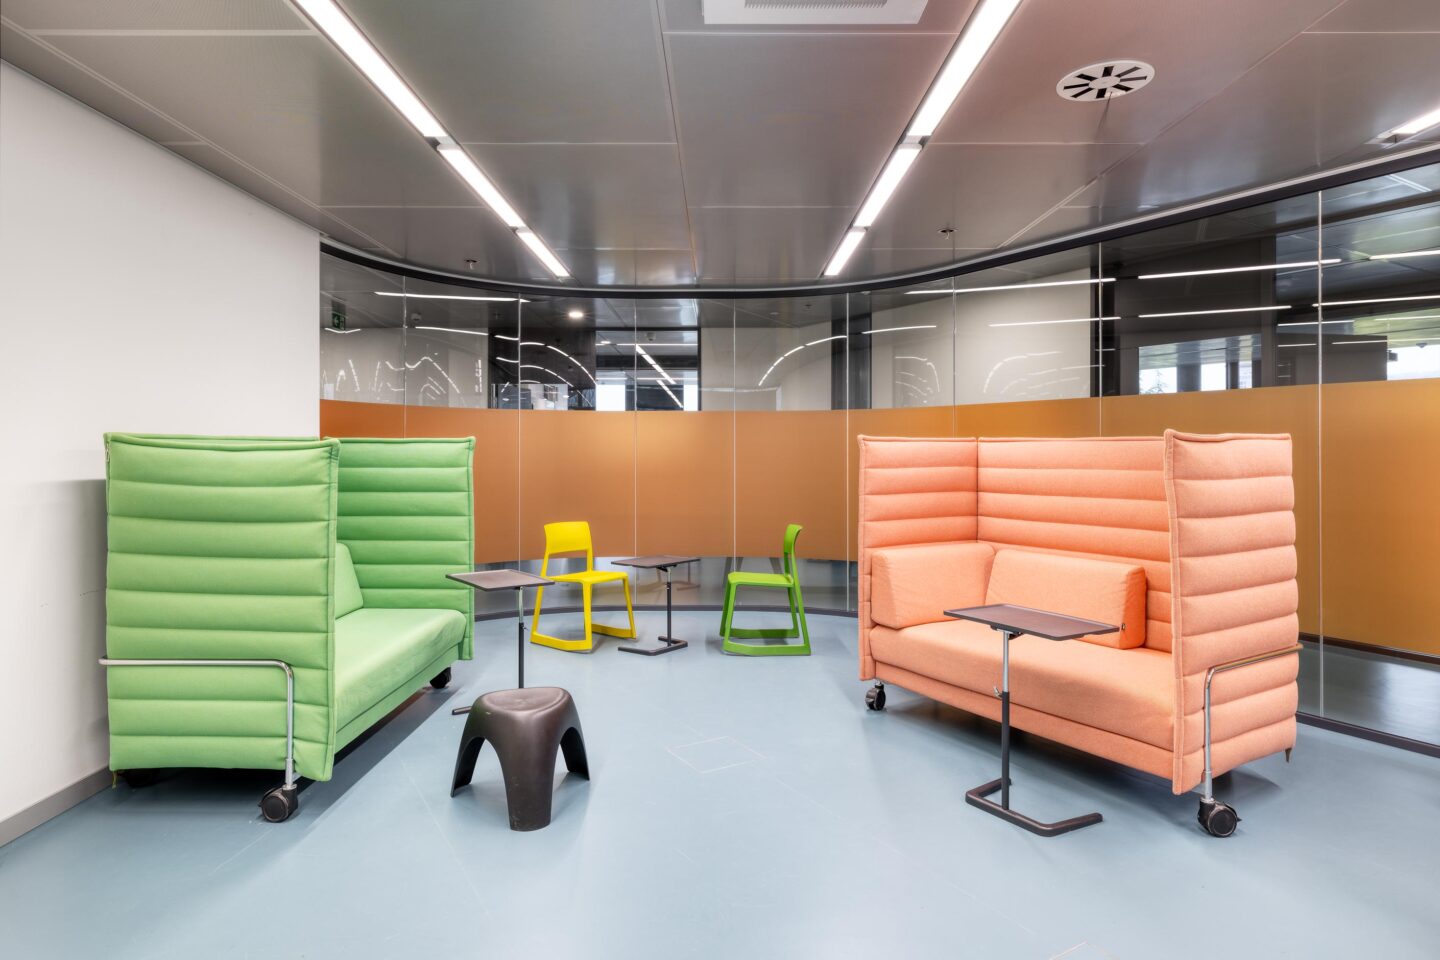 DHBW Stuttgart, Faculty of Engineering | communal area with sitting nooks